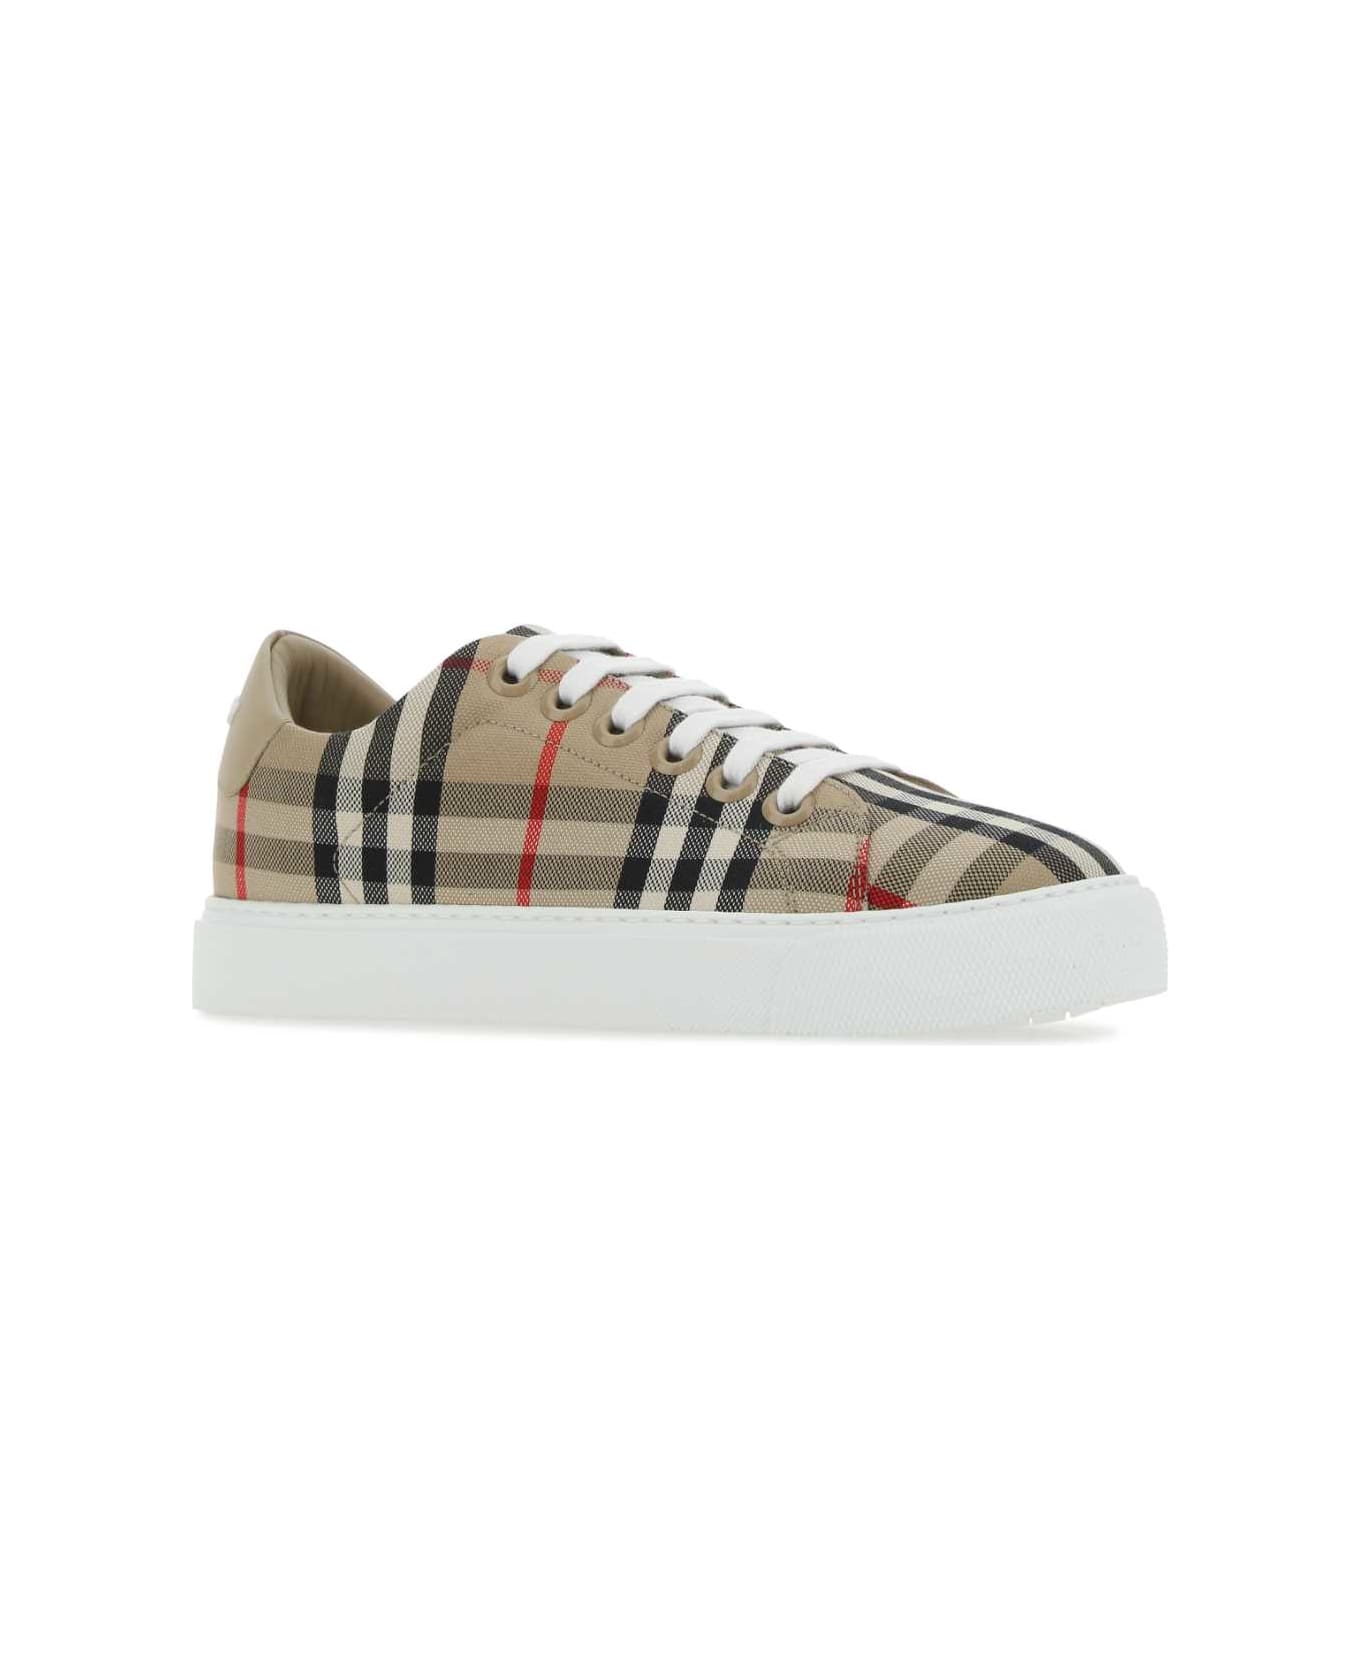 Burberry Embroidered Canvas Sneakers - A7026